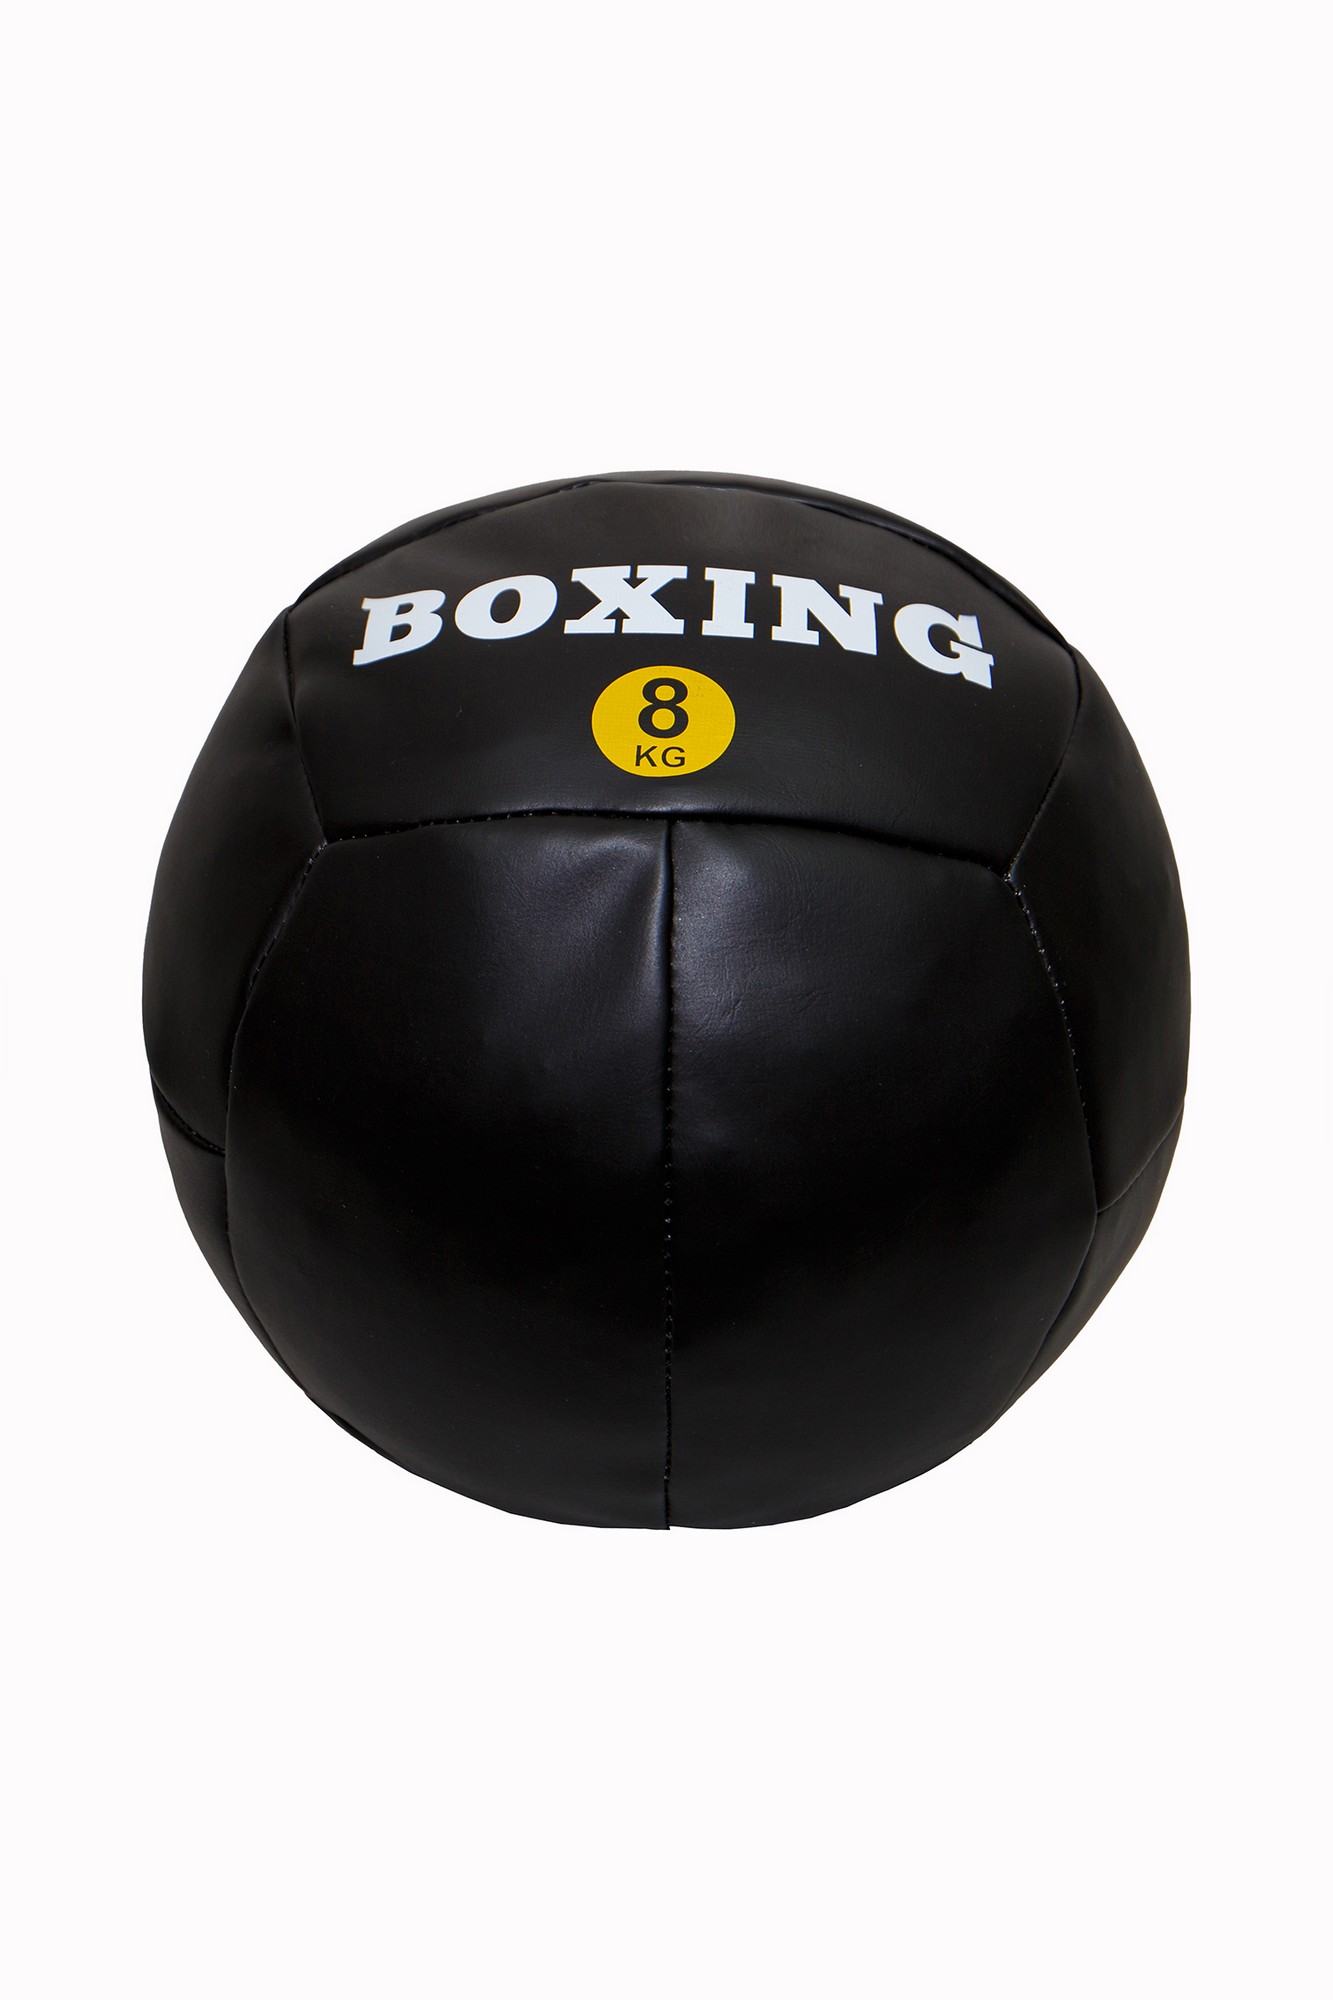 Медицинбол 8кг Totalbox Boxing МДИБ-8 1333_2000